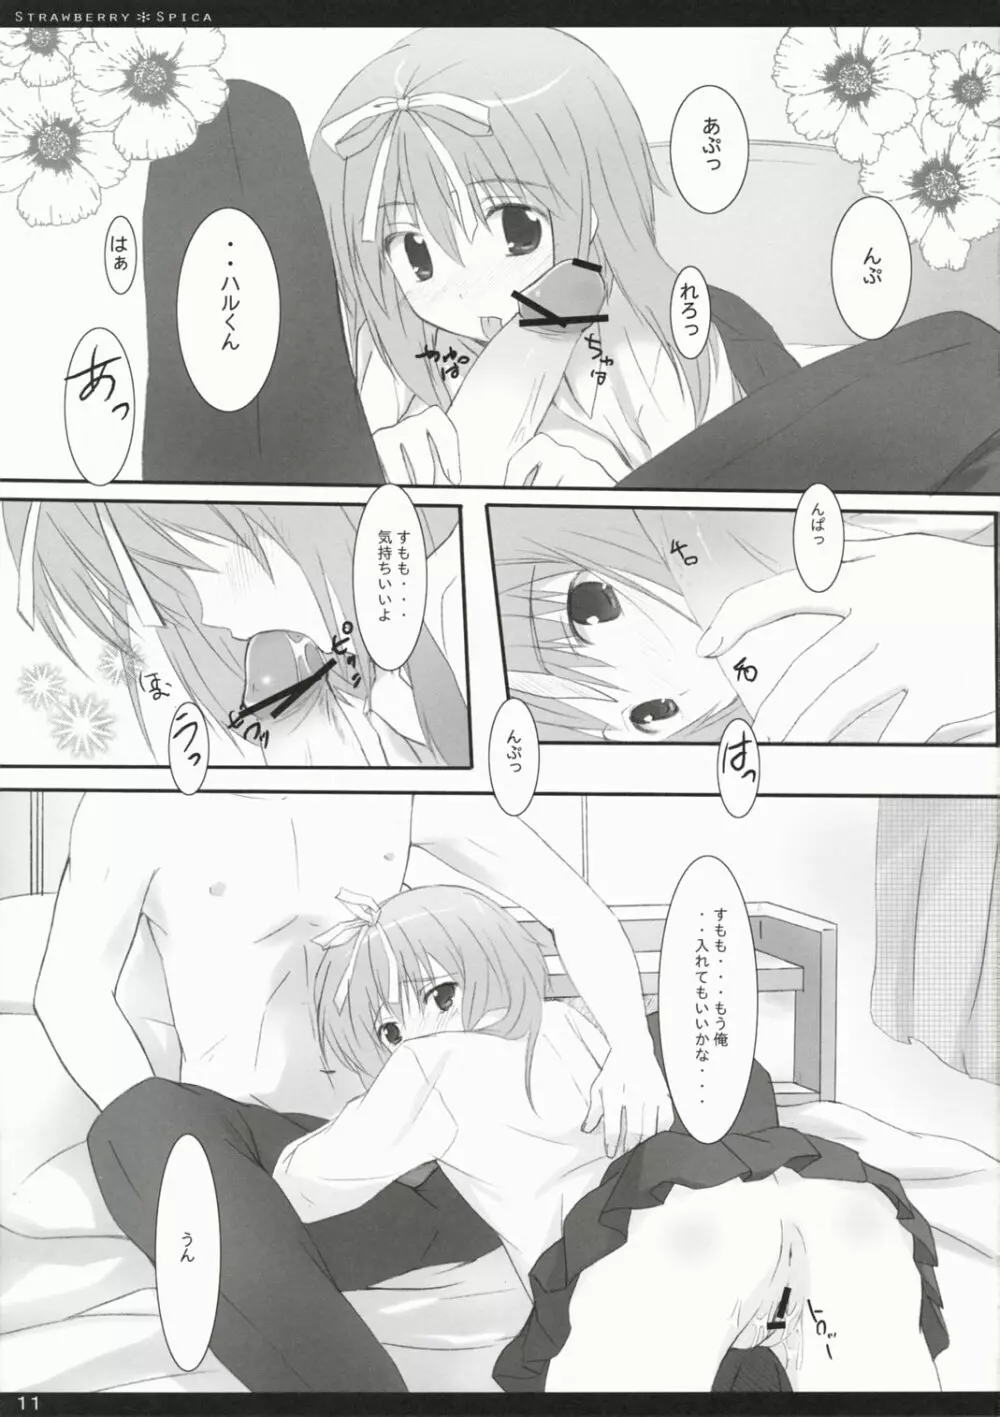 Strawberry Spica Page.10